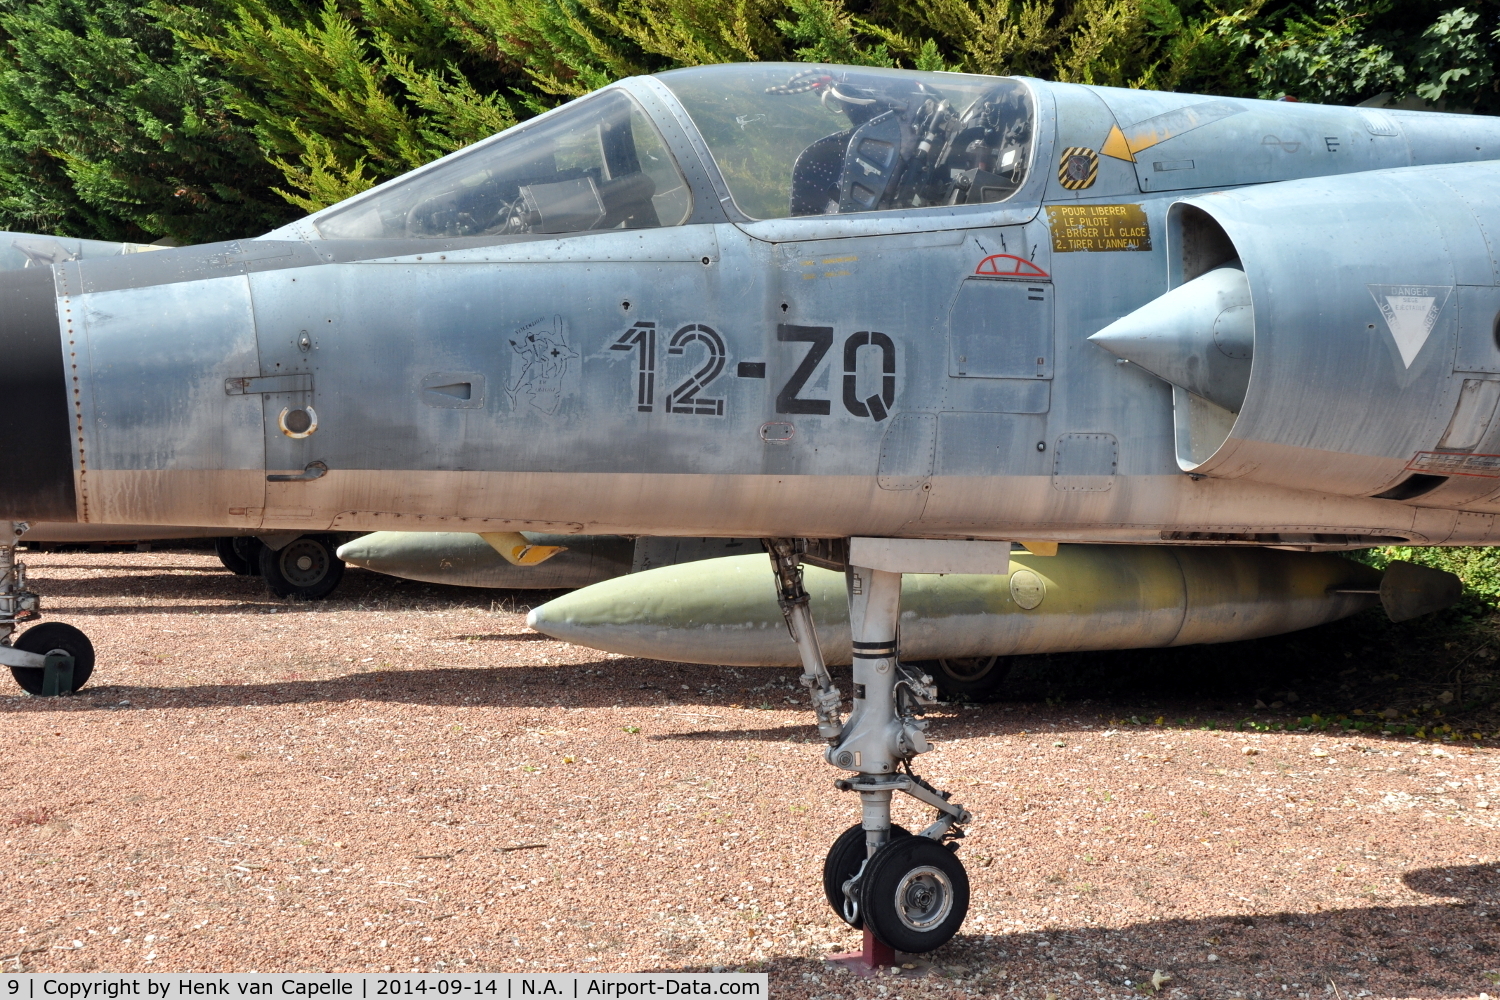 9, Dassault Mirage F.1C C/N 9, Dassault Mirage F1C fighter of the French Air Force preserved at the Chateau de Savigny aircraft museum.